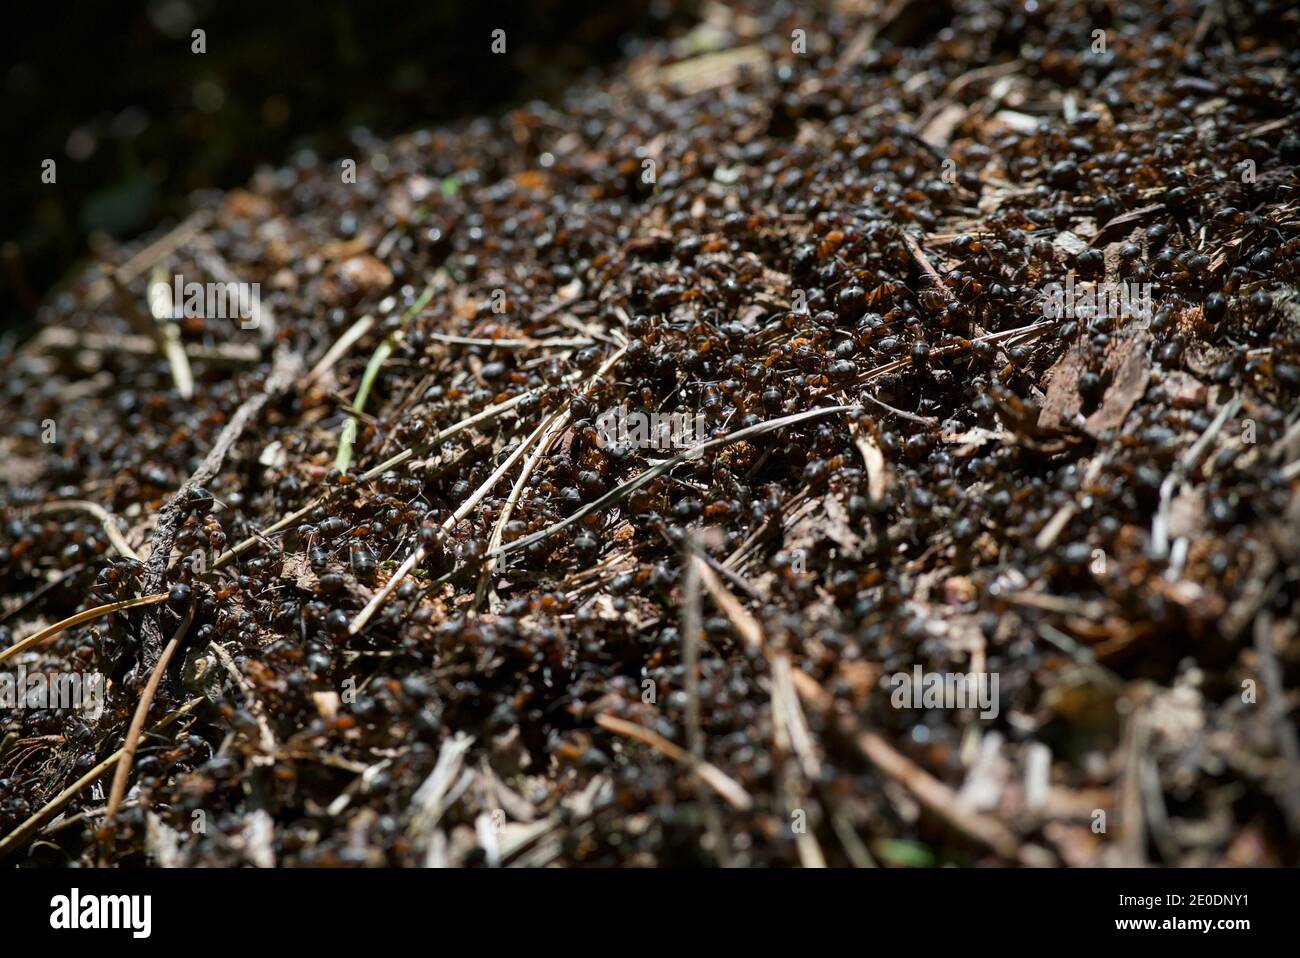 Red wood Ant (formica rufa) nest in the UK, made from pine needles and leaves, up close using a macro lens showing the worker ants Stock Photo